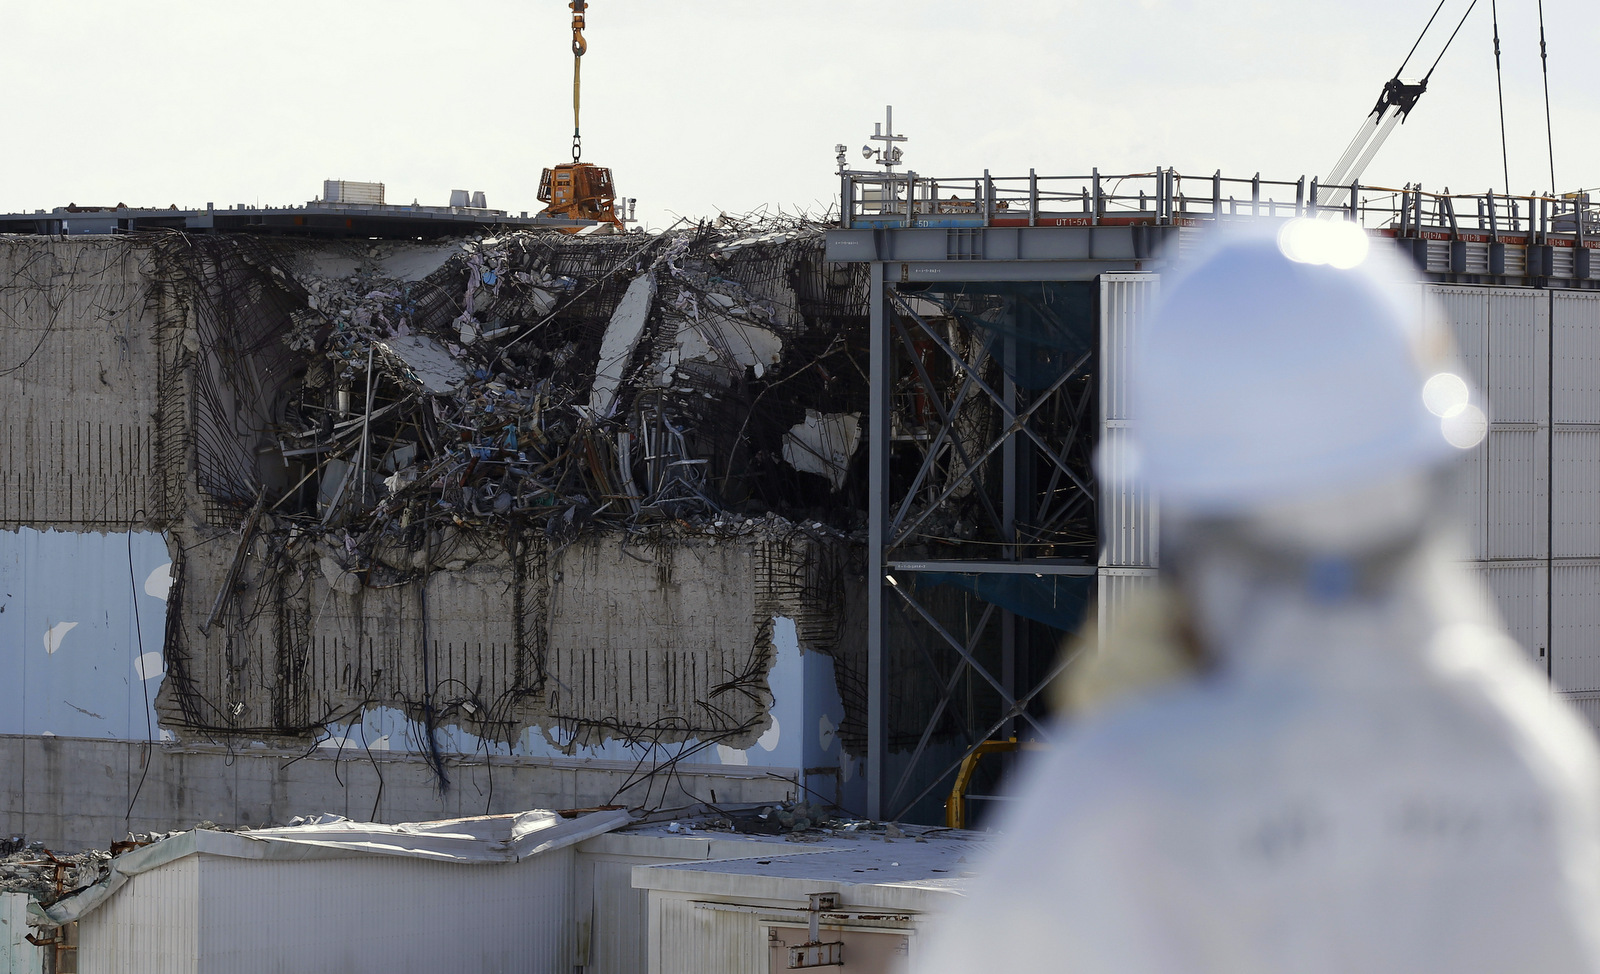 A member of the media tour group wearing a protective suit and a mask looks at the No. 3 reactor building at Tokyo Electric Power Co's (TEPCO) tsunami-crippled Fukushima Dai-ichi nuclear power plant in Okuma, Fukushima Prefecture, northeastern Japan, Wednesday, Feb. 10, 2016. (Toru Hanai/AP)